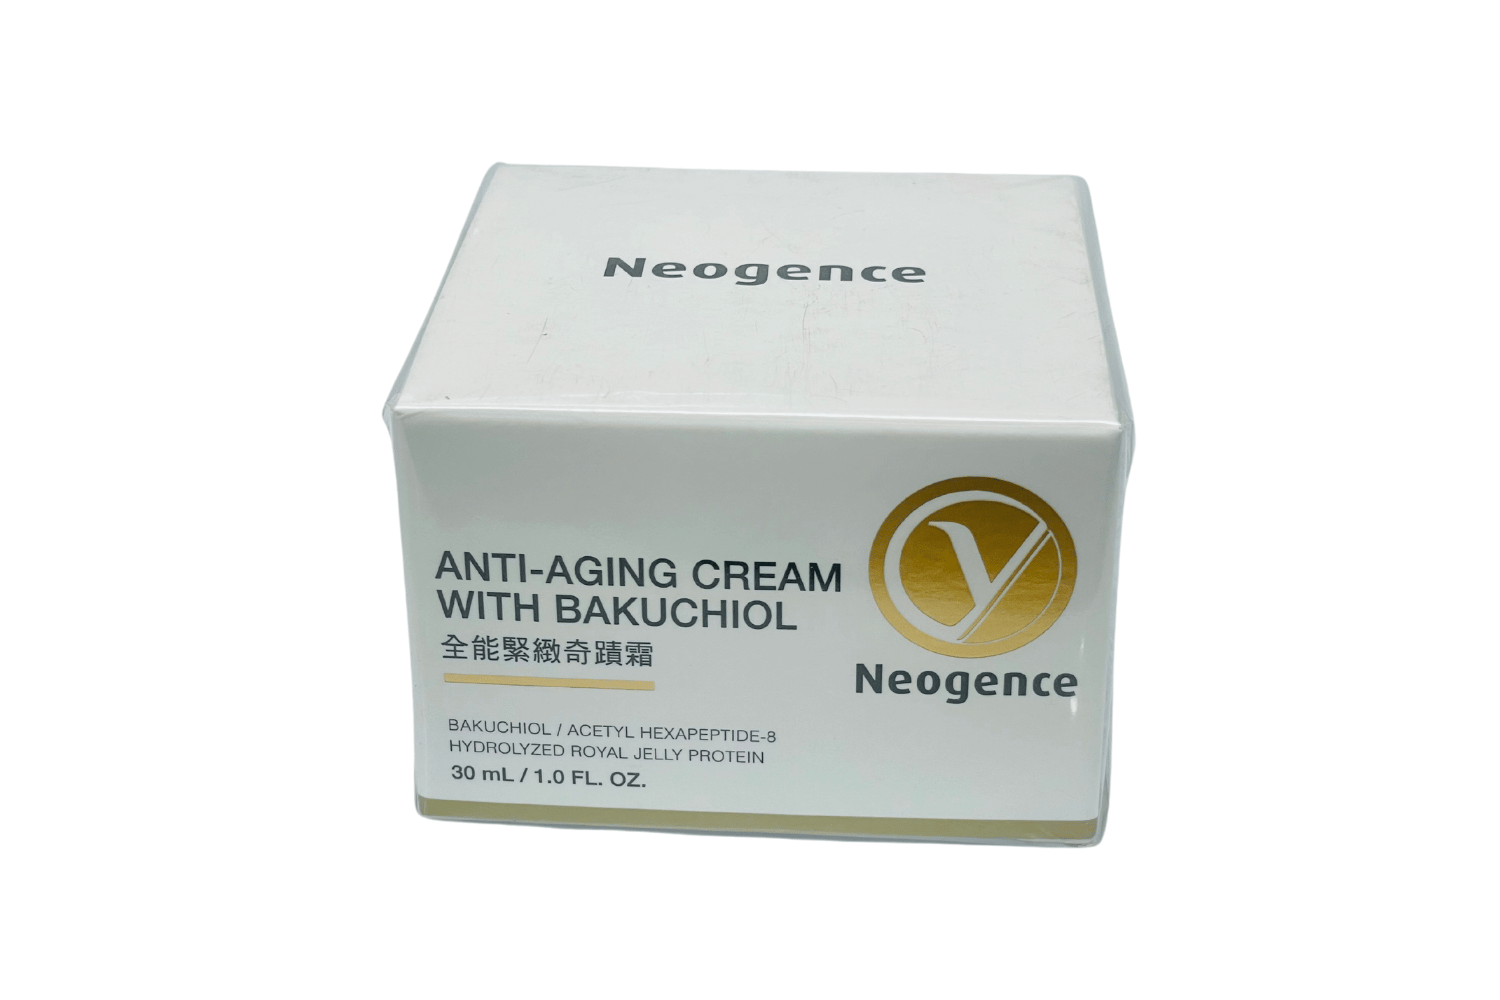 Neogence Anti-Aging Cream with Bakuchiol (30ml): Youthful Radiance and Wrinkle Reduction